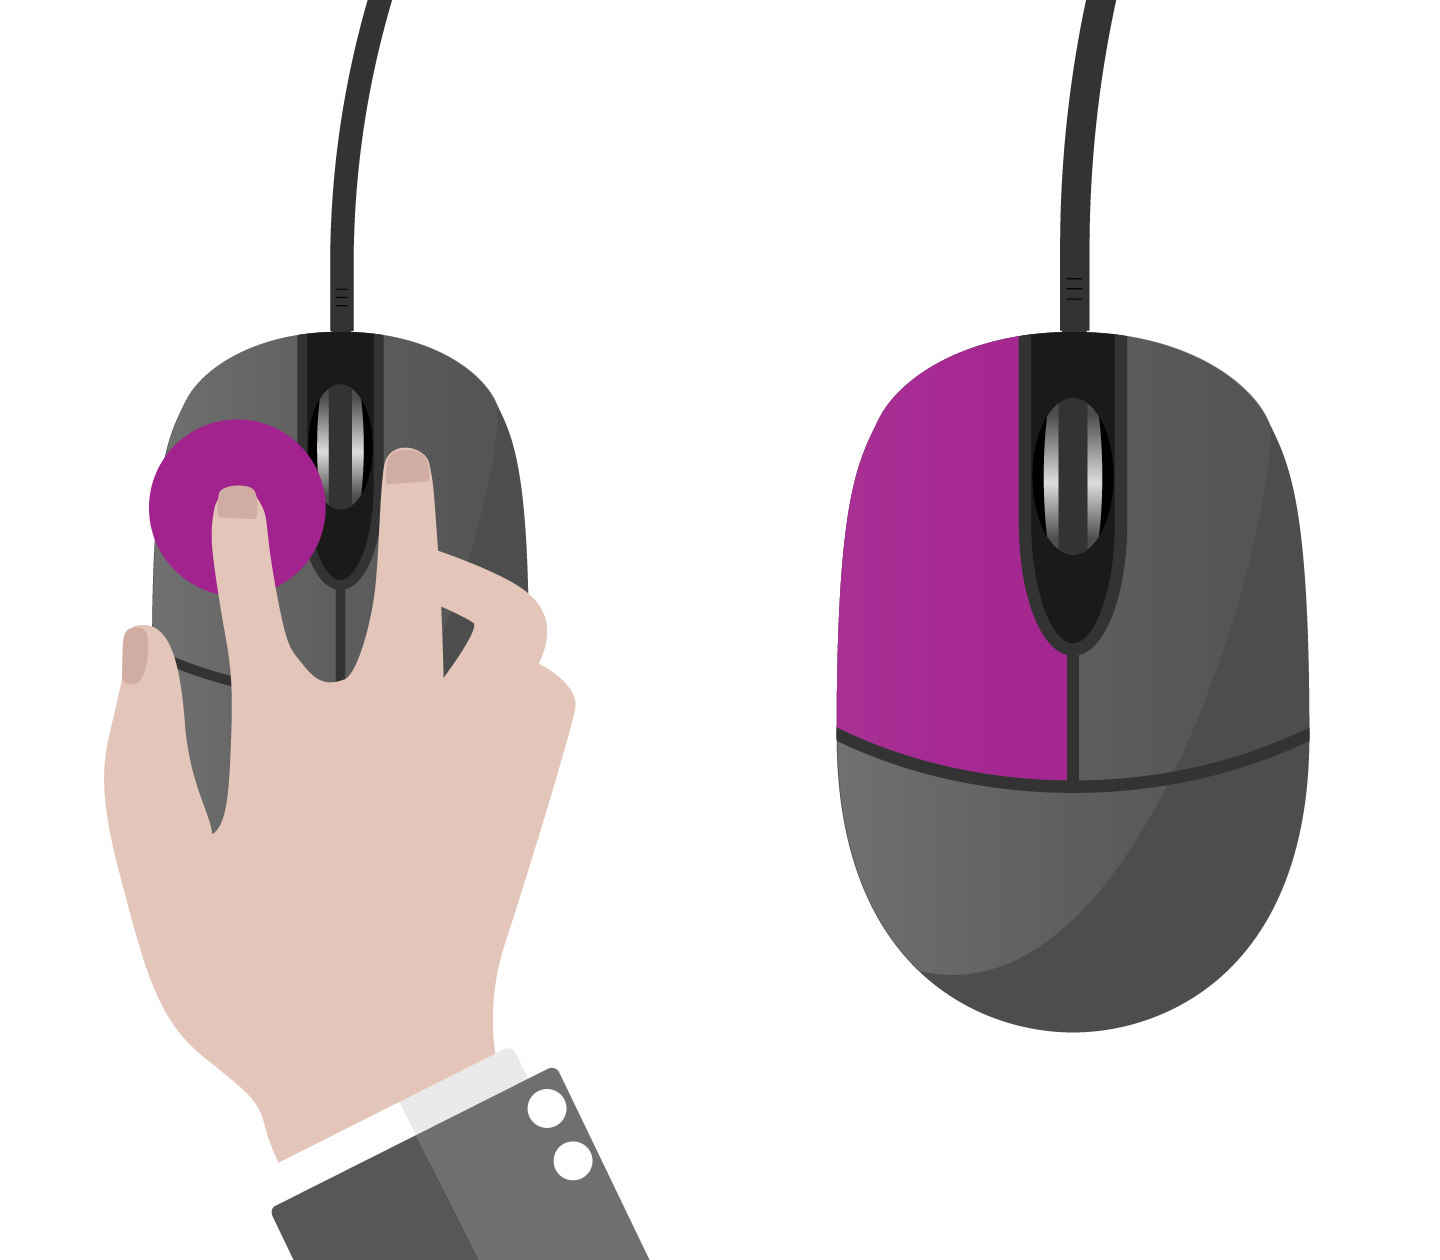 A left click on a mouse